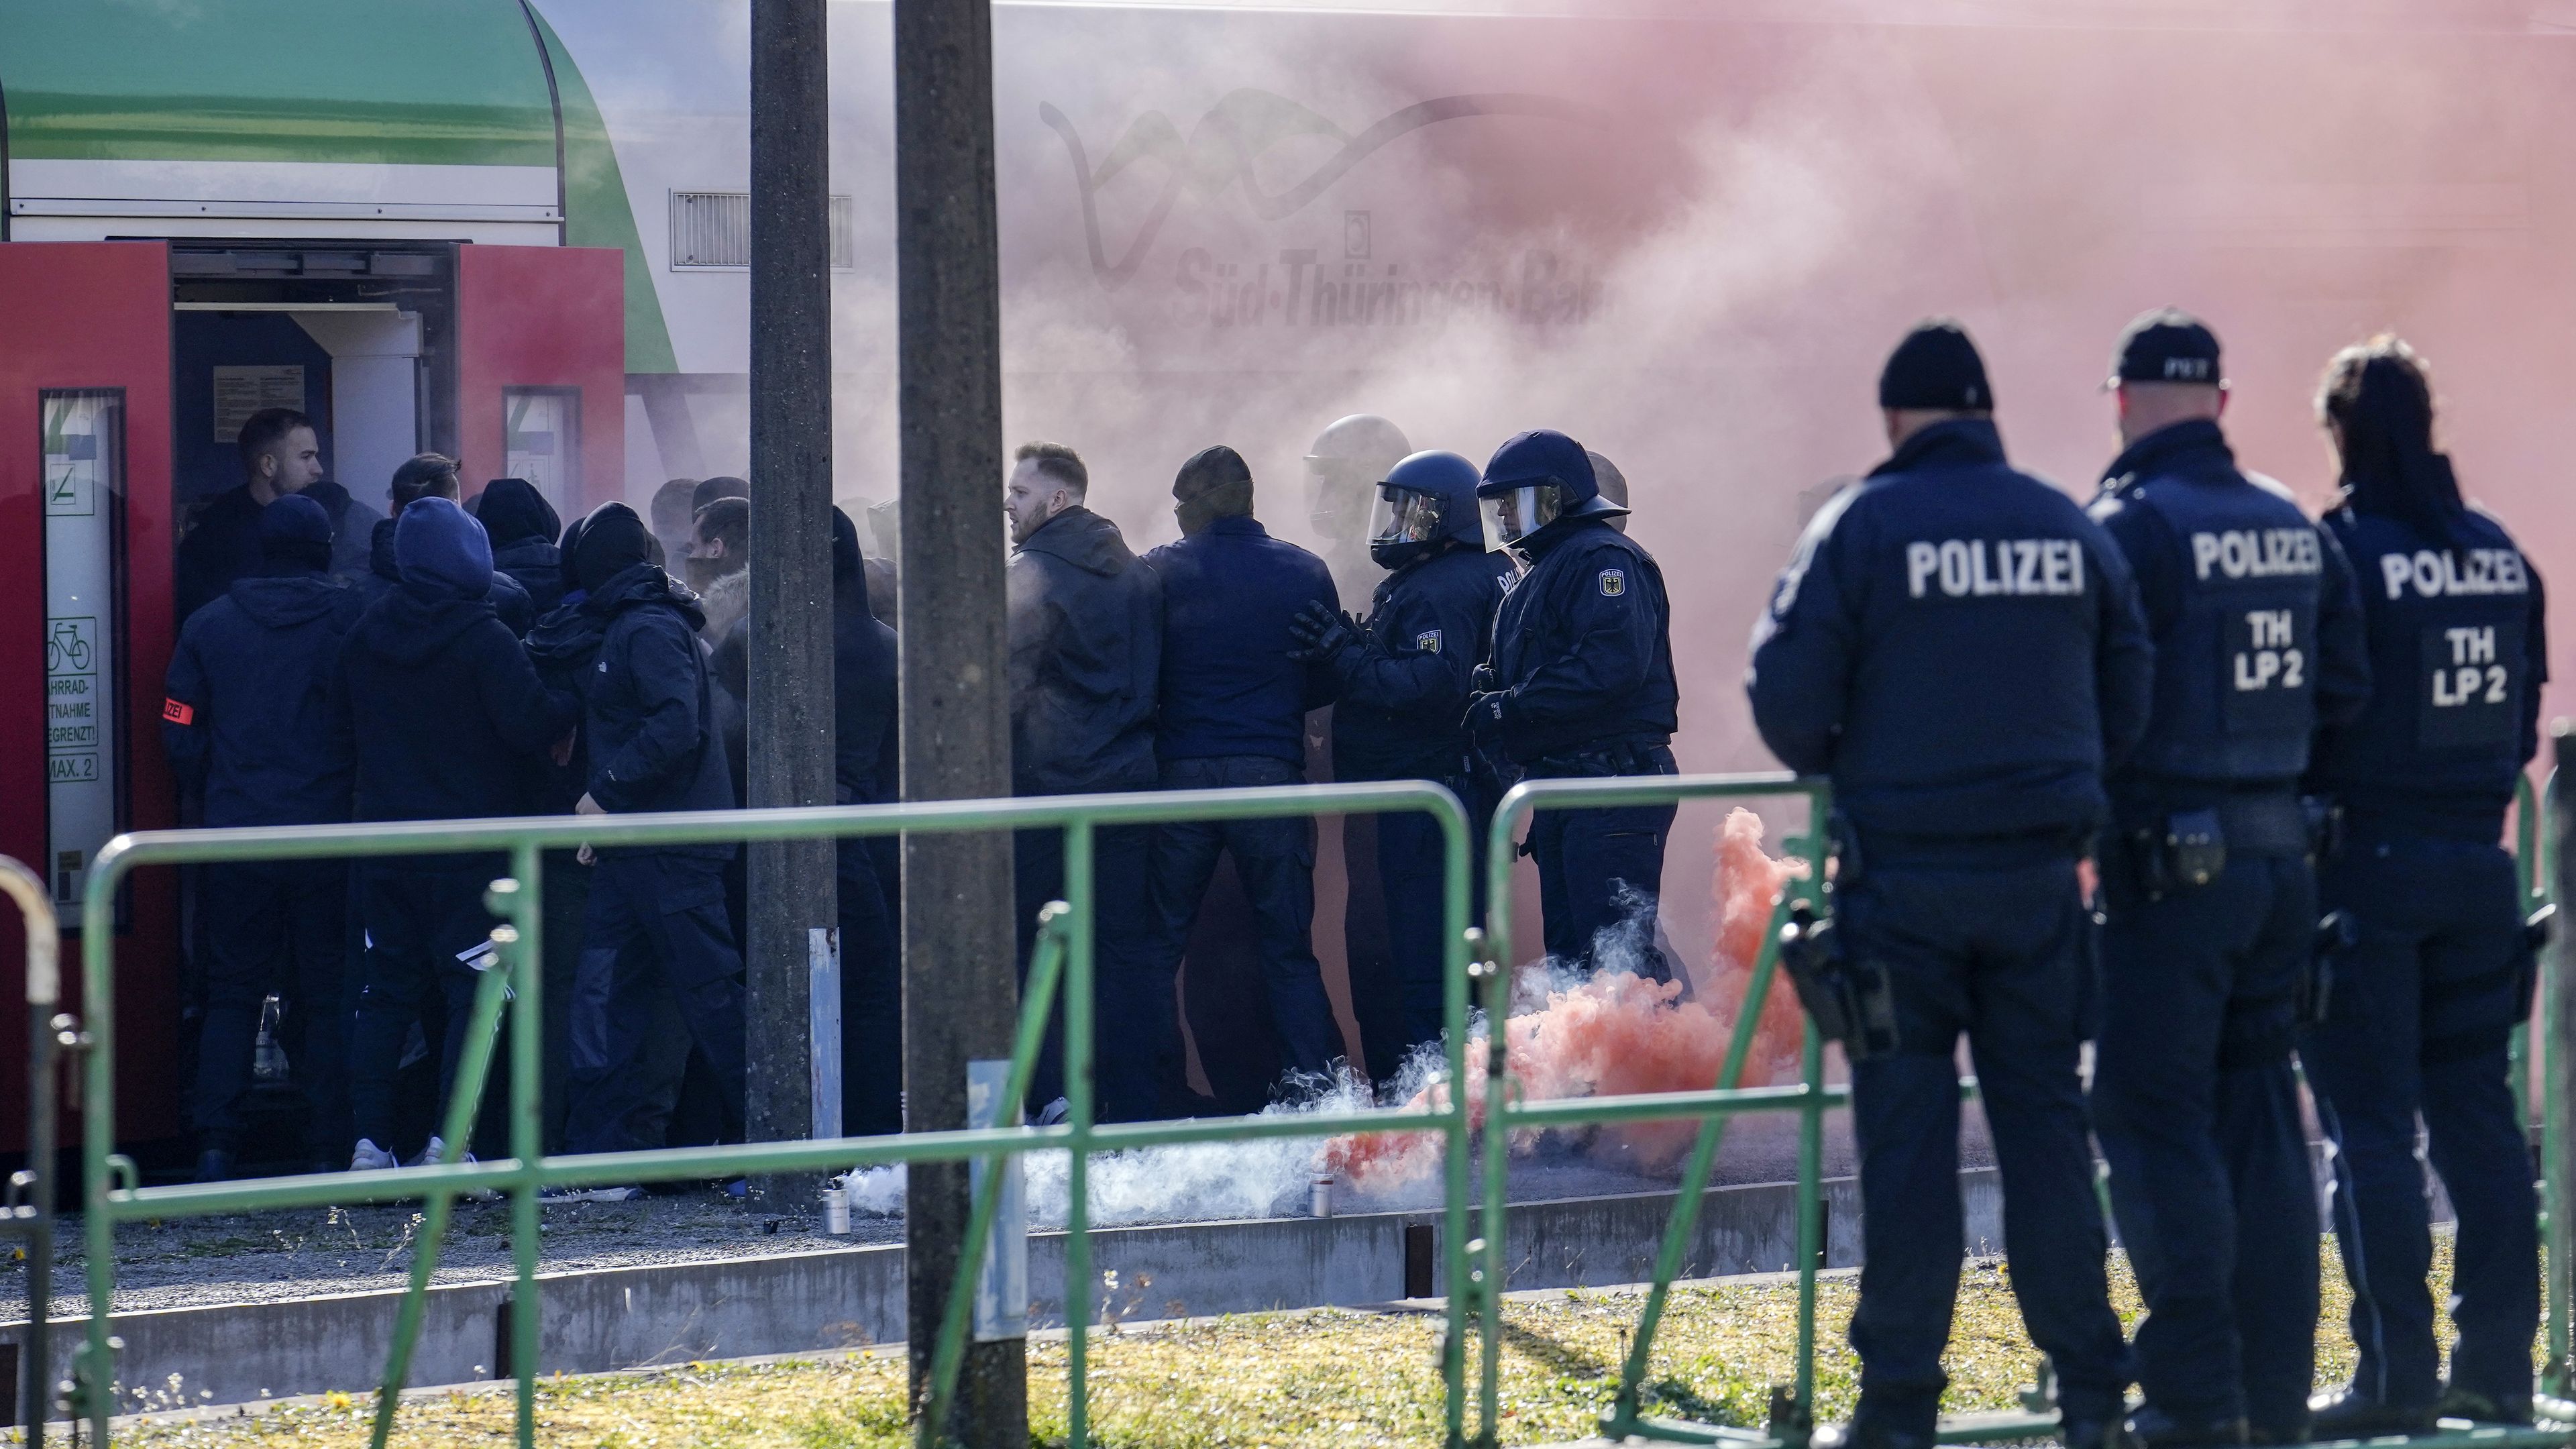 Hundreds of German police subdue 'hooligans' in training exercise for Euros 2024